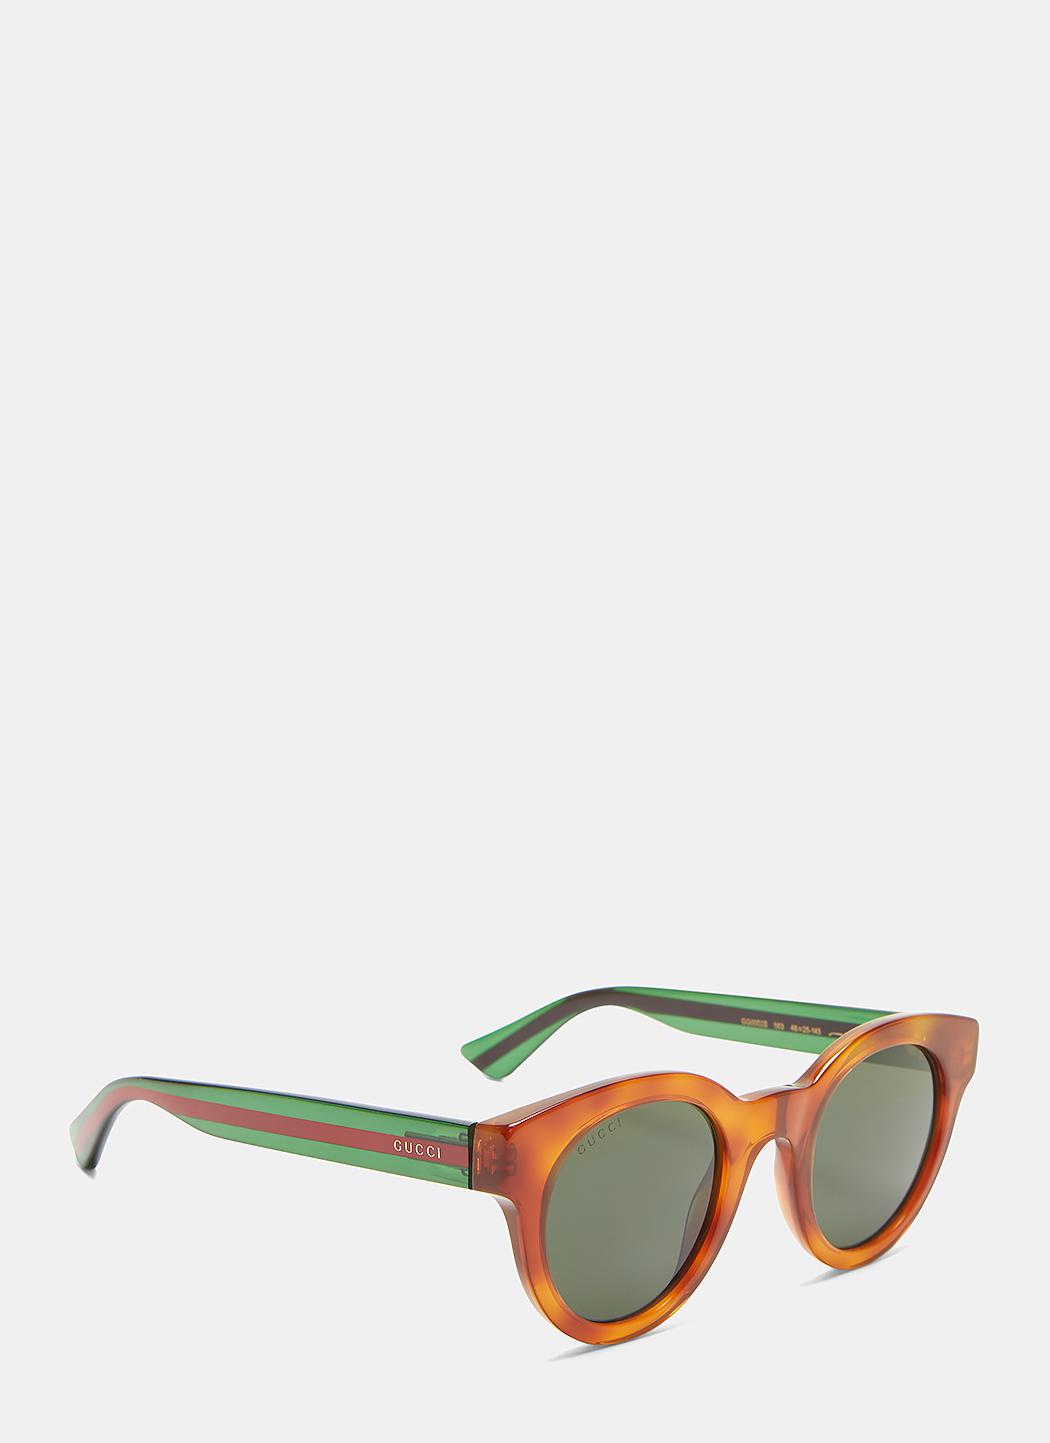 gucci sunglasses with green and red 